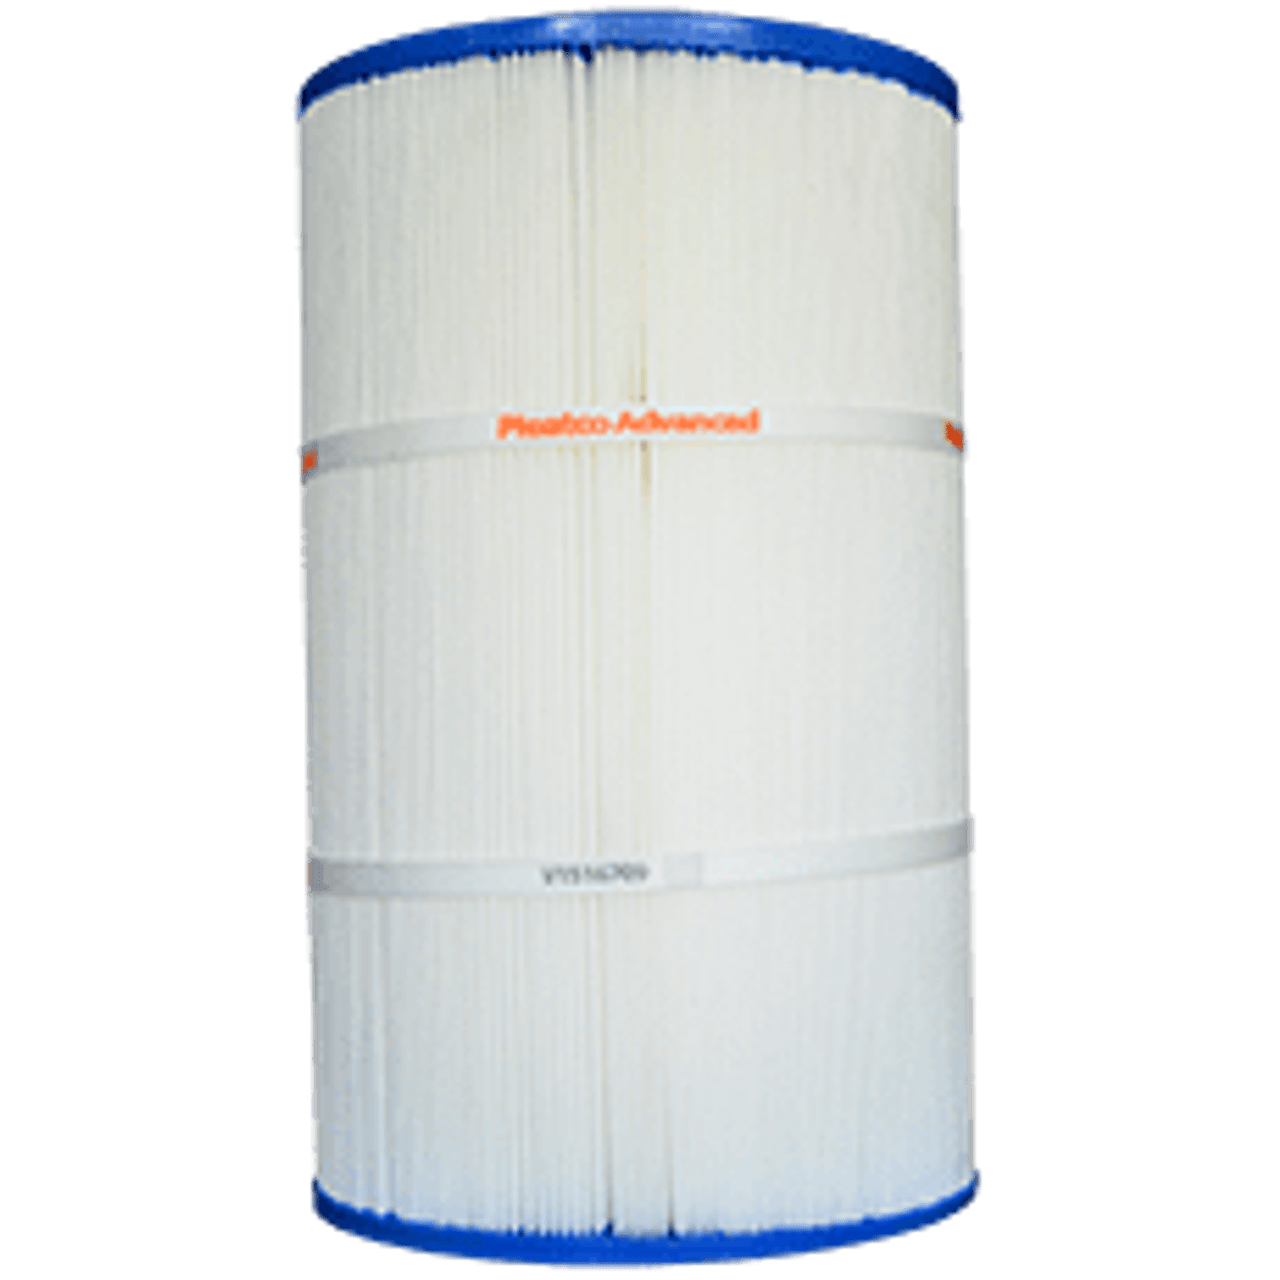 Pleatco PSD85-2002 Filter Cartridge Replaces 80801, C-8380, AK-70031 and FC-2810